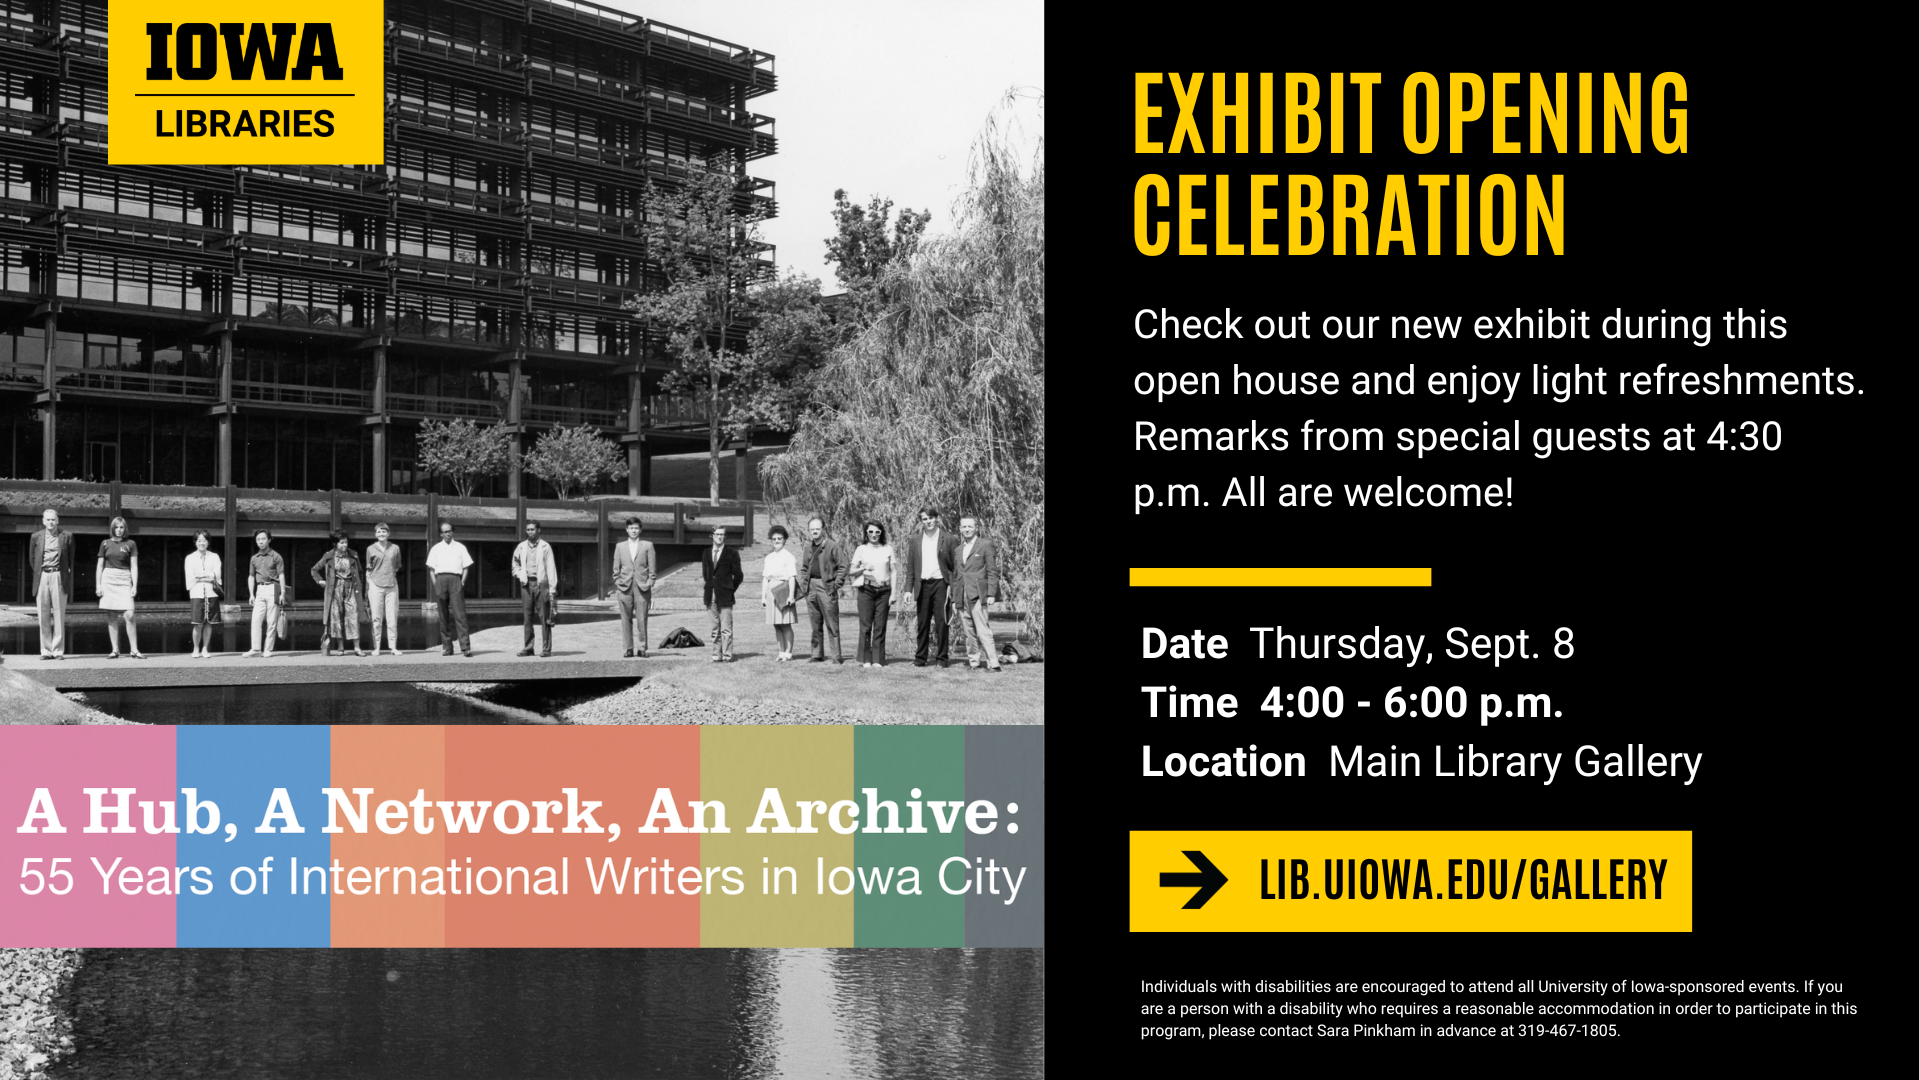 Exhibit opening celebration on September 8 at 4:00 PM in the Main Library Gallery.